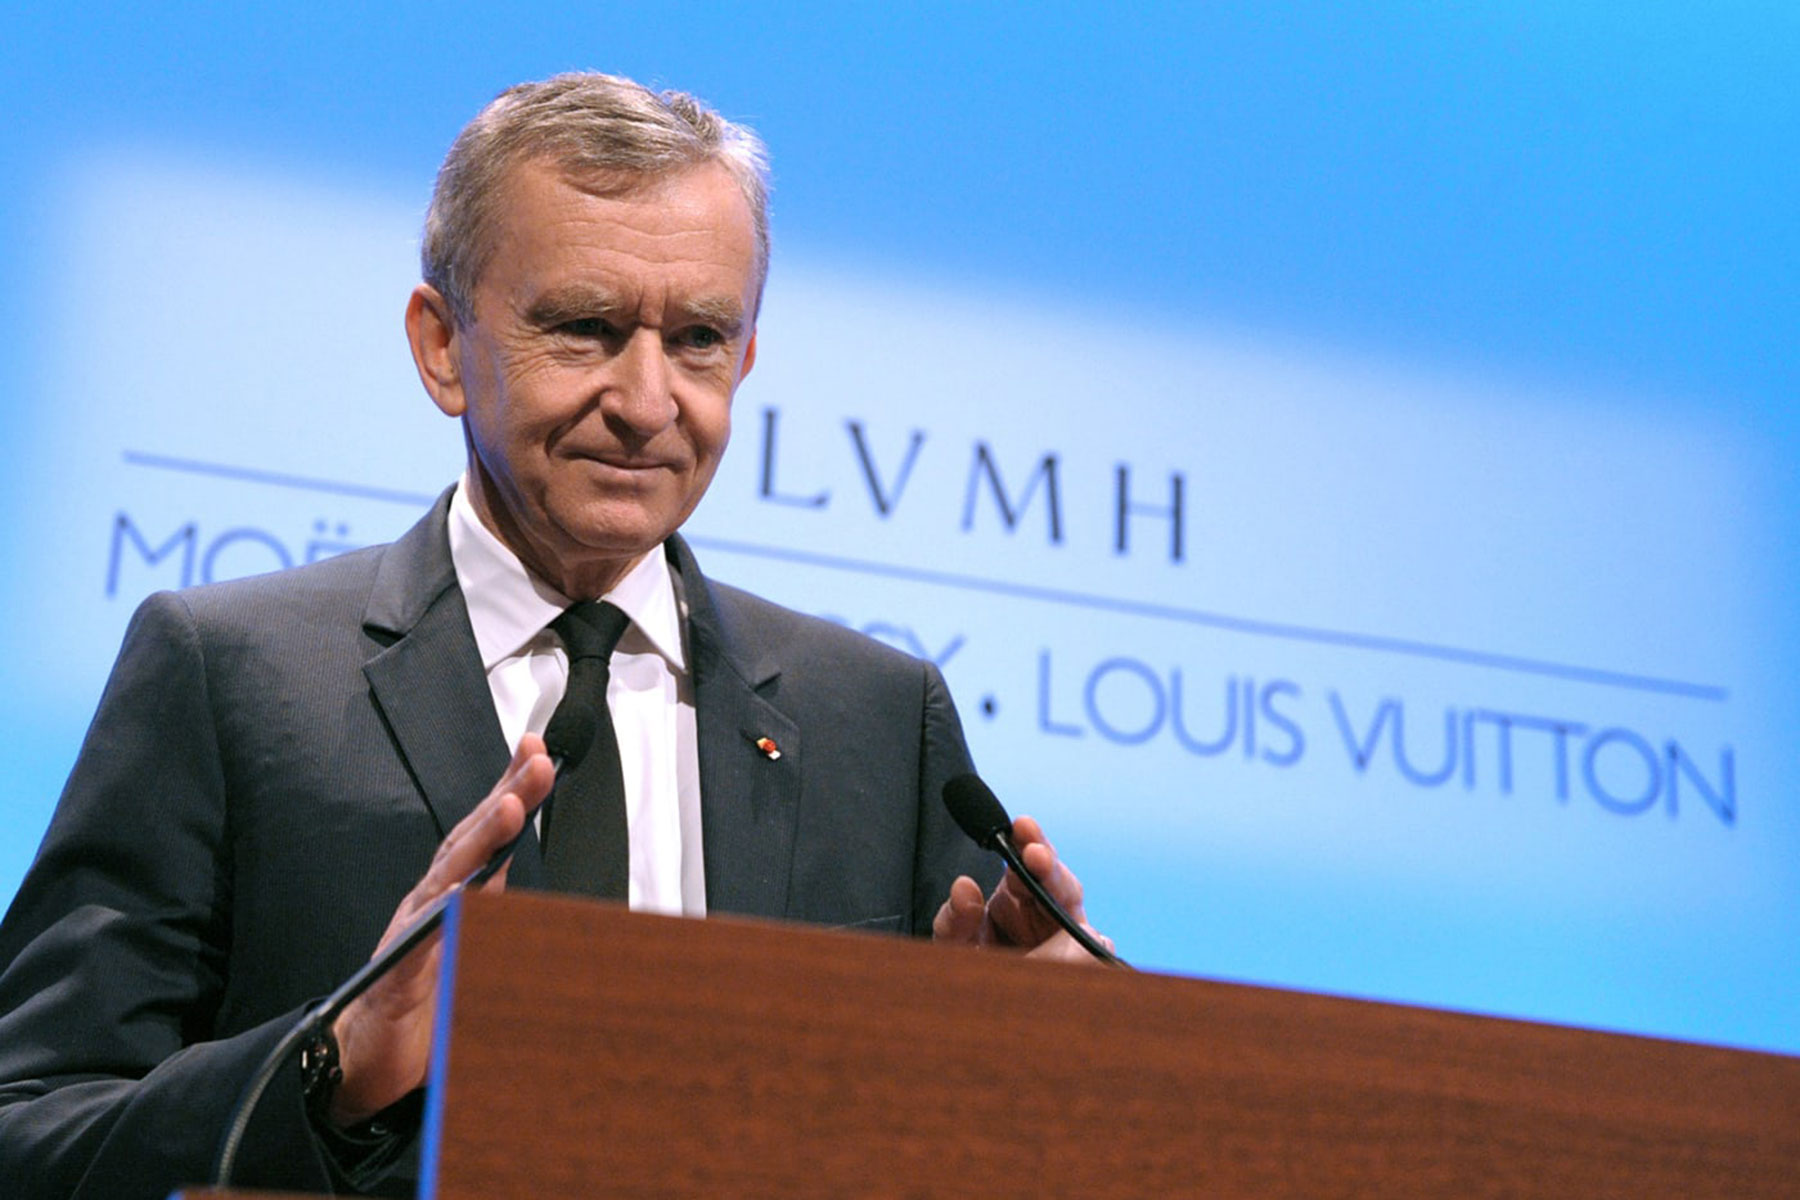 A timeline of how LVMH became the world's largest luxury conglomerate